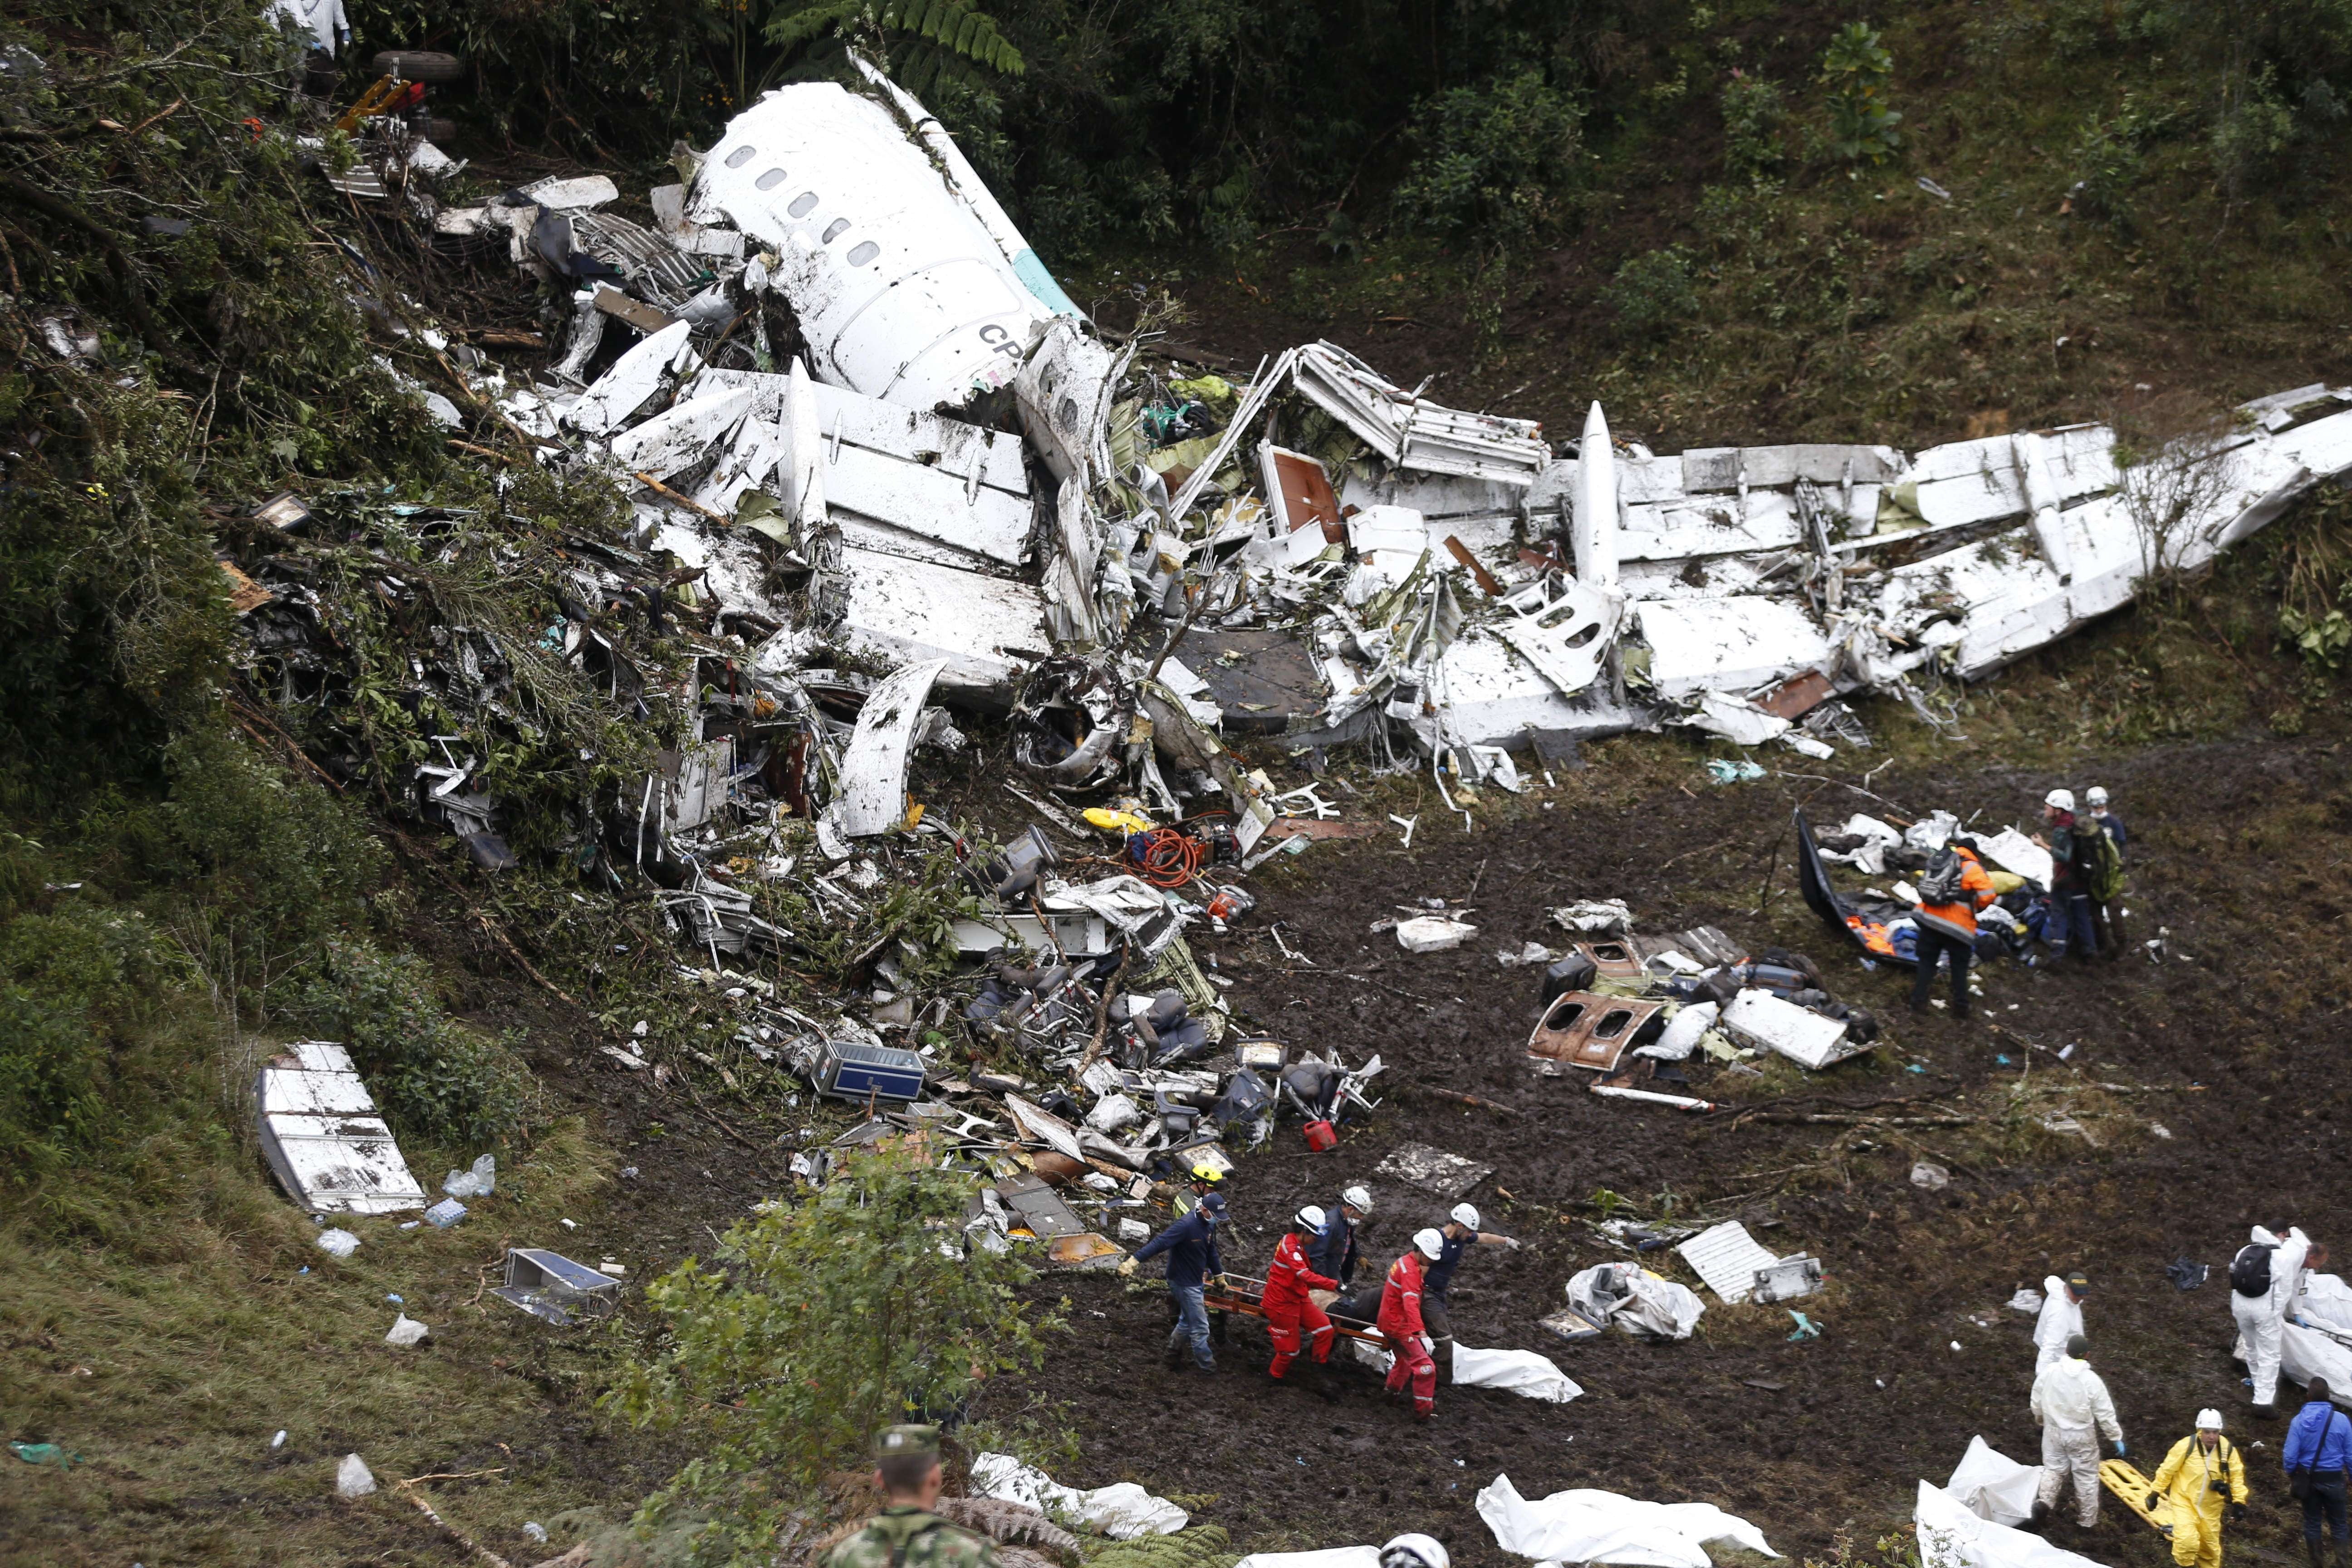 The wreckage of the plane in the area near Medellin. Photo: AP